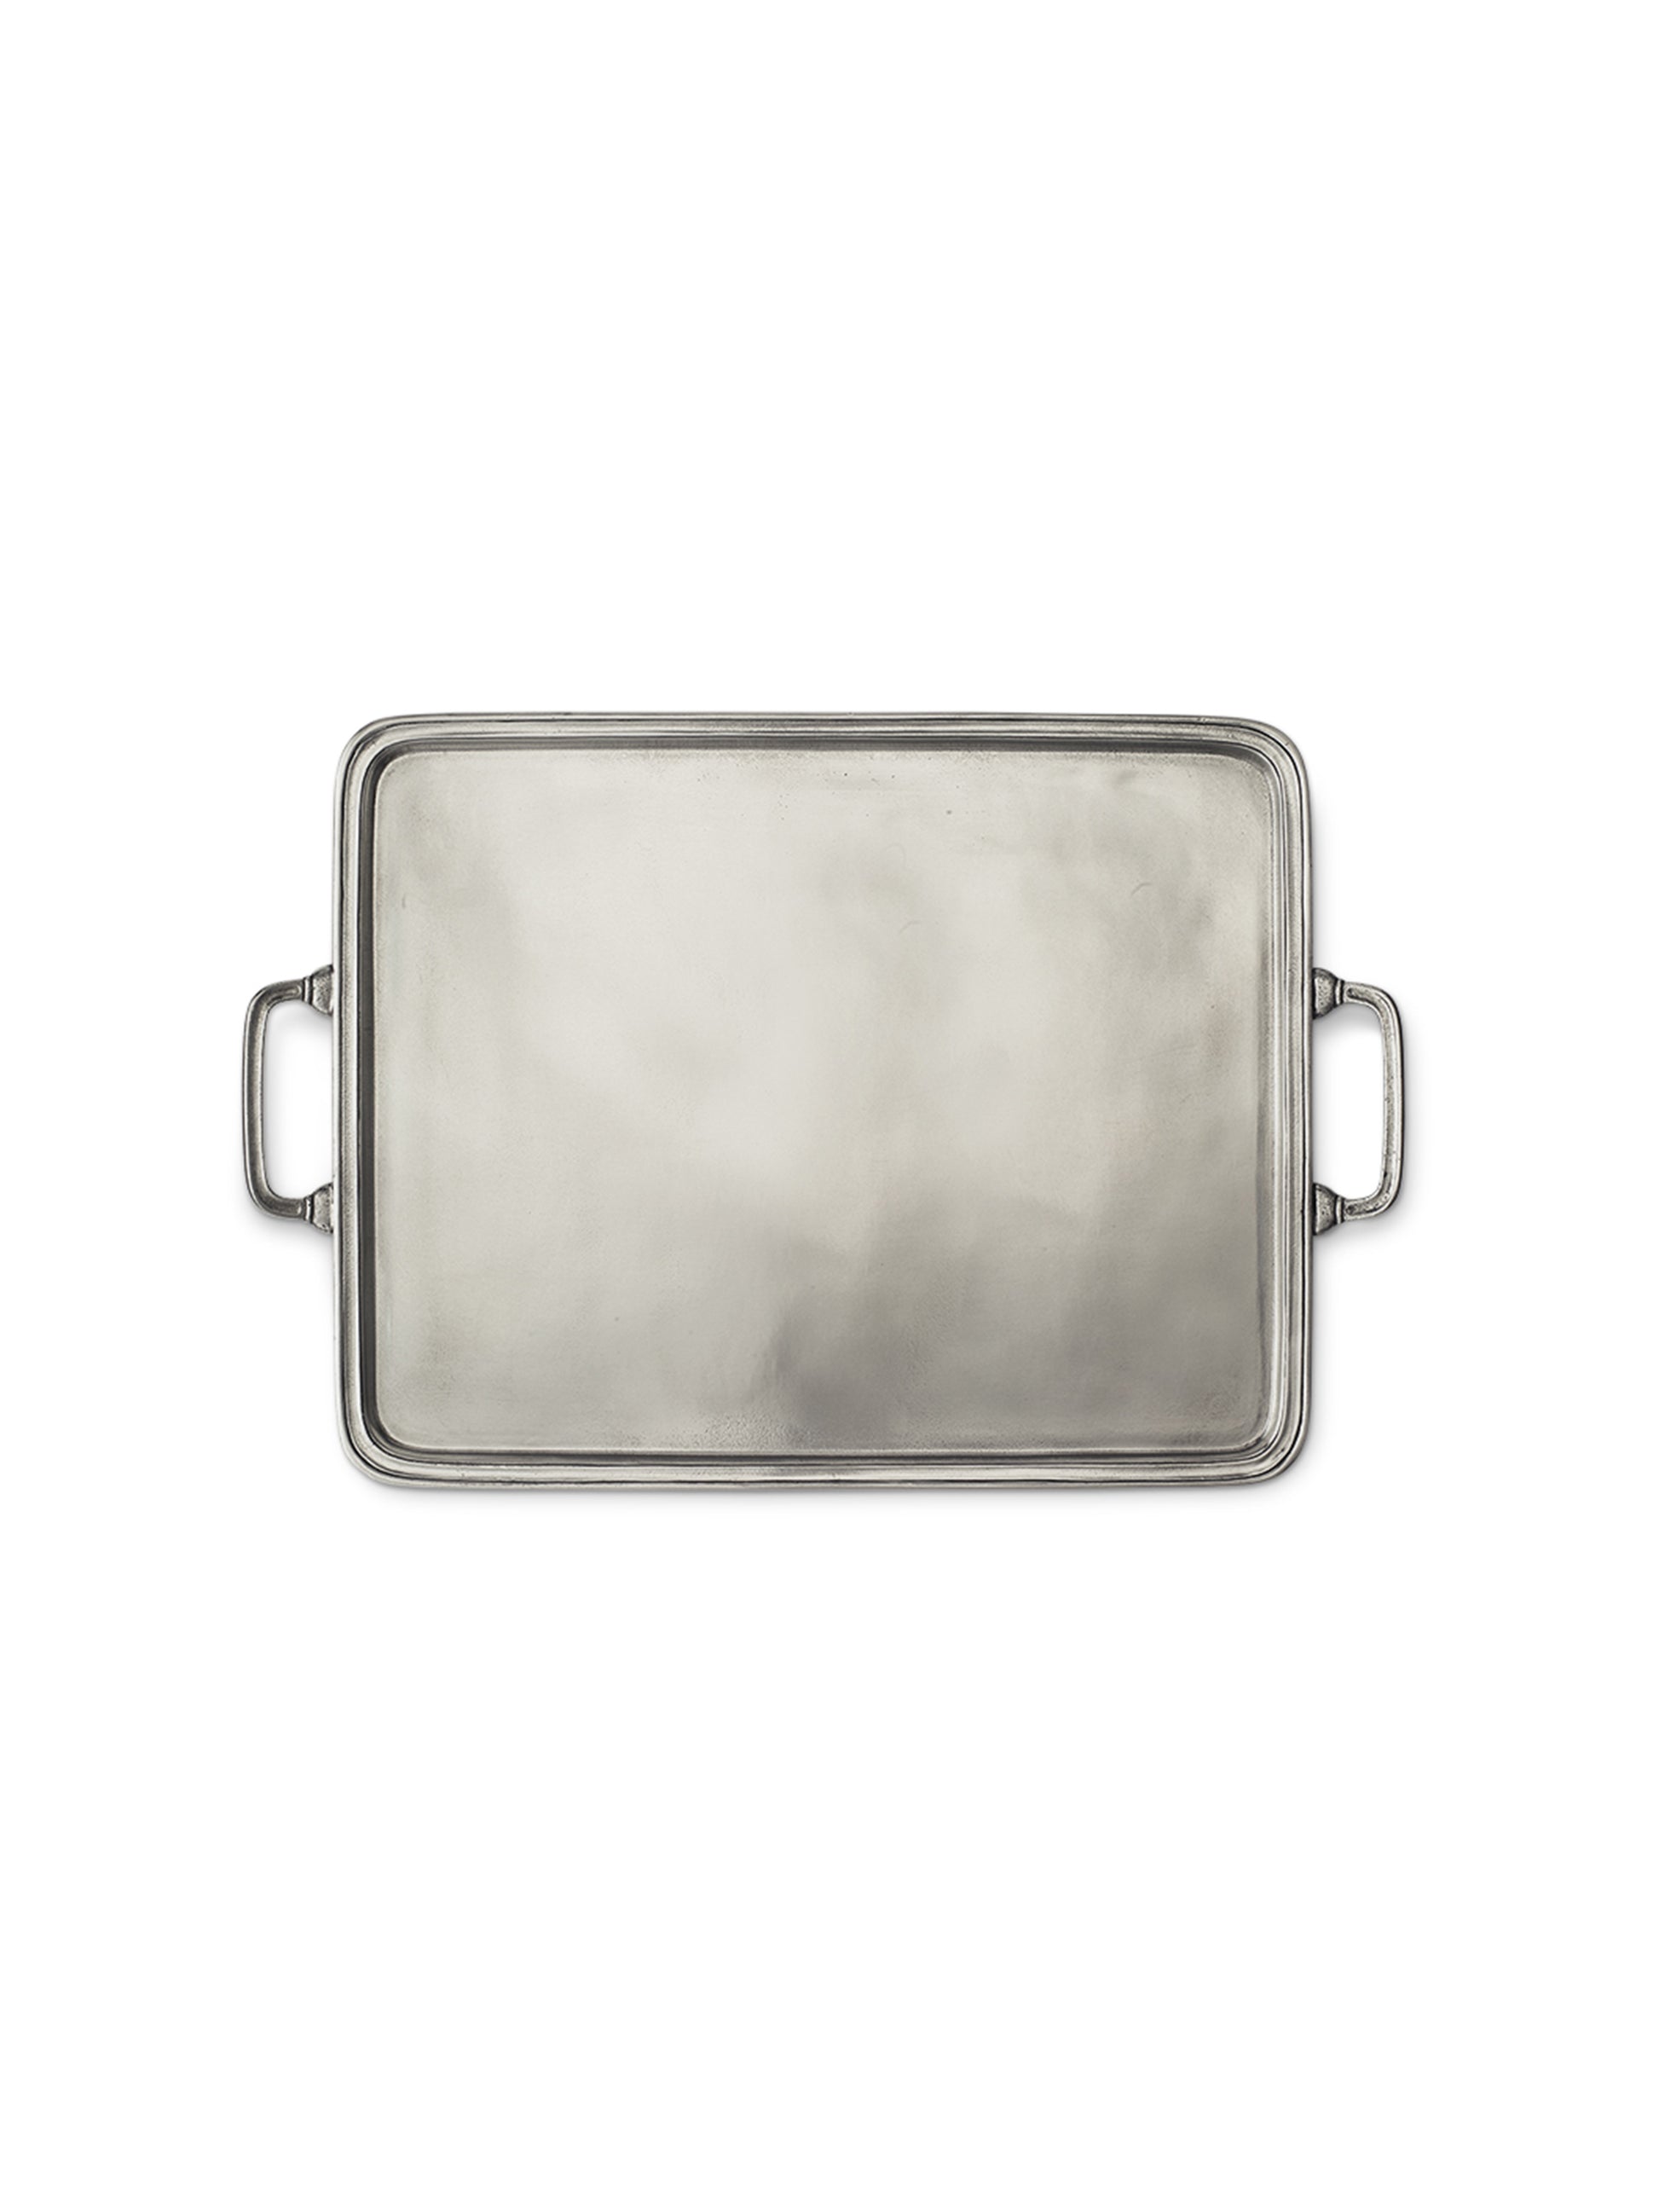 MATCH Pewter Rectangle Trays with Handles Extra Large Weston Table